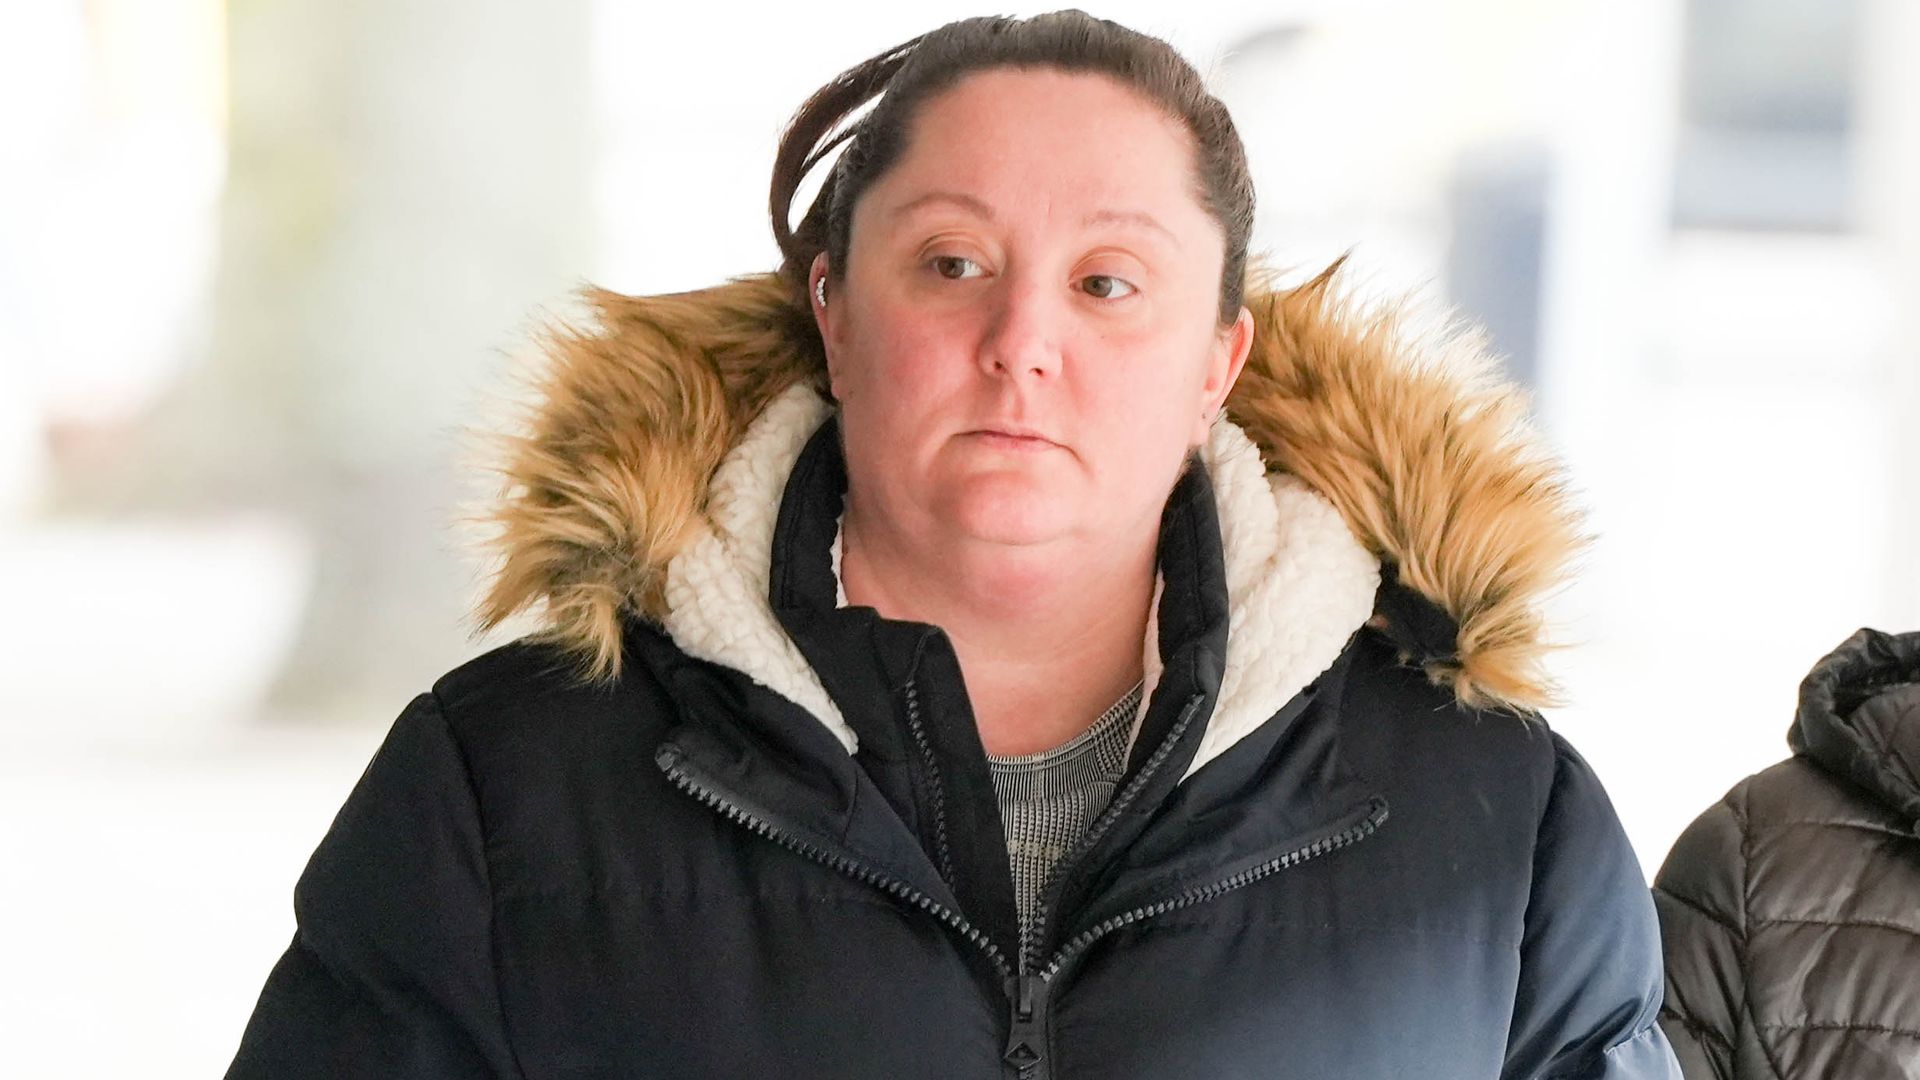 Nursery worker guilty of manslaughter over death of baby strapped to bean bag